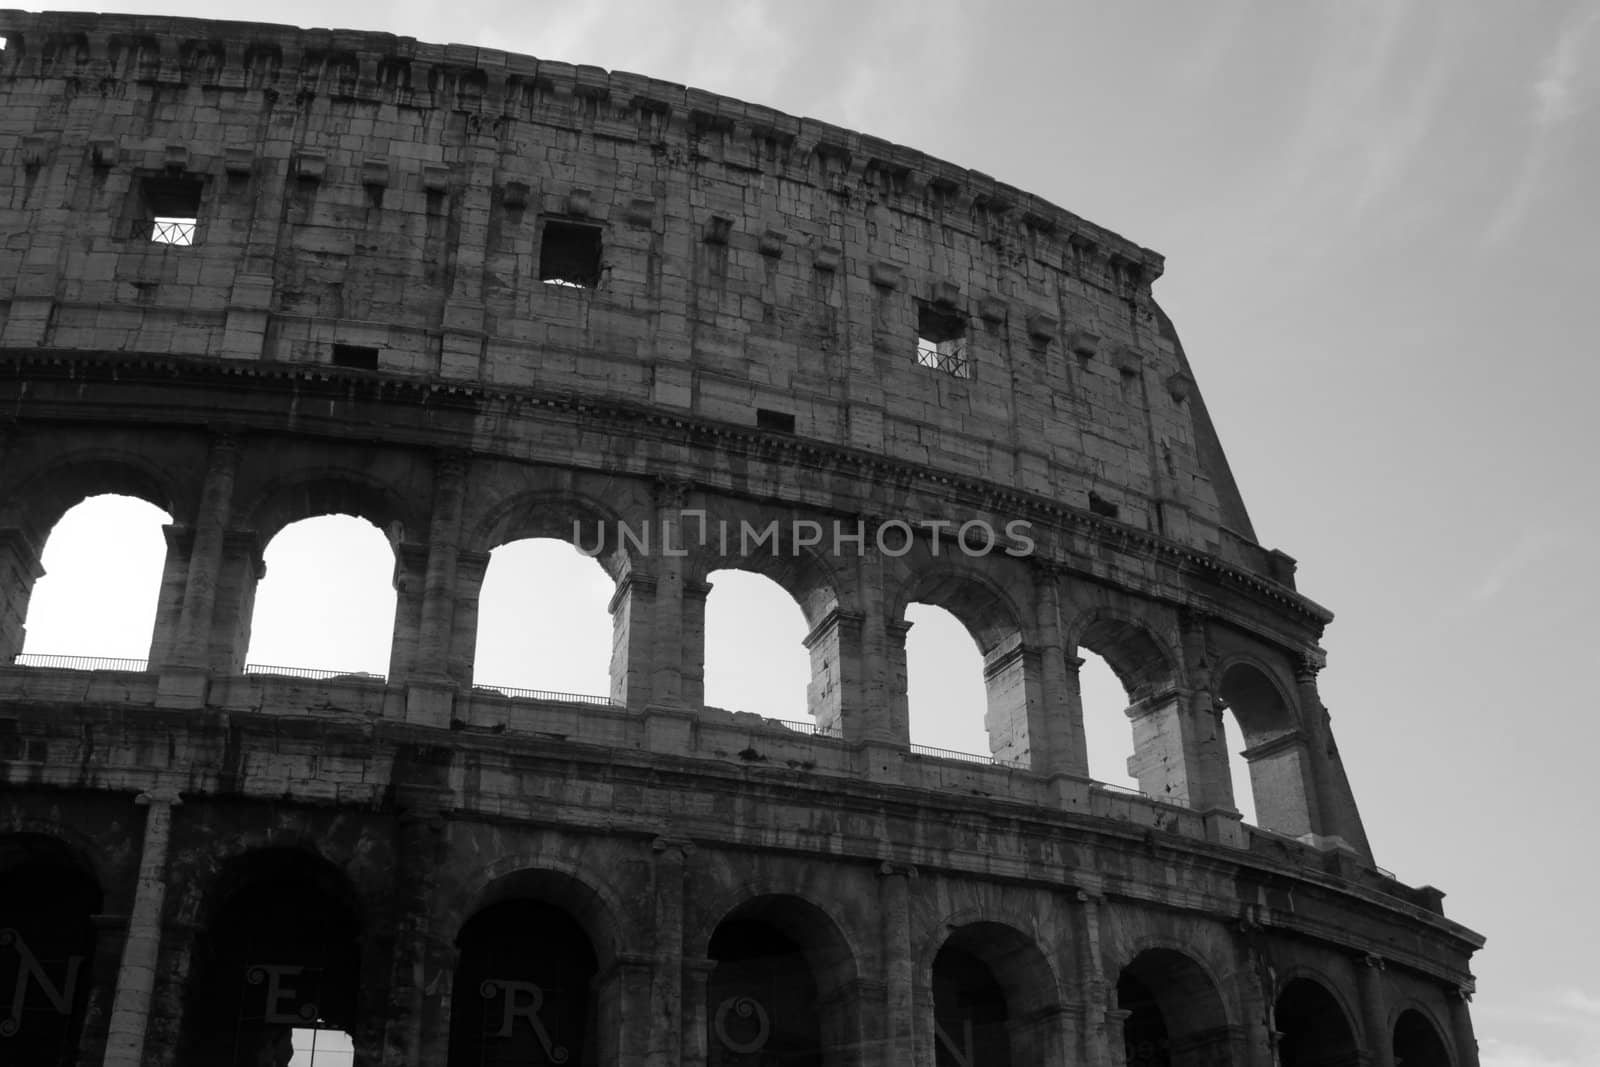 The magnificant colosseum in Rome, Italy.